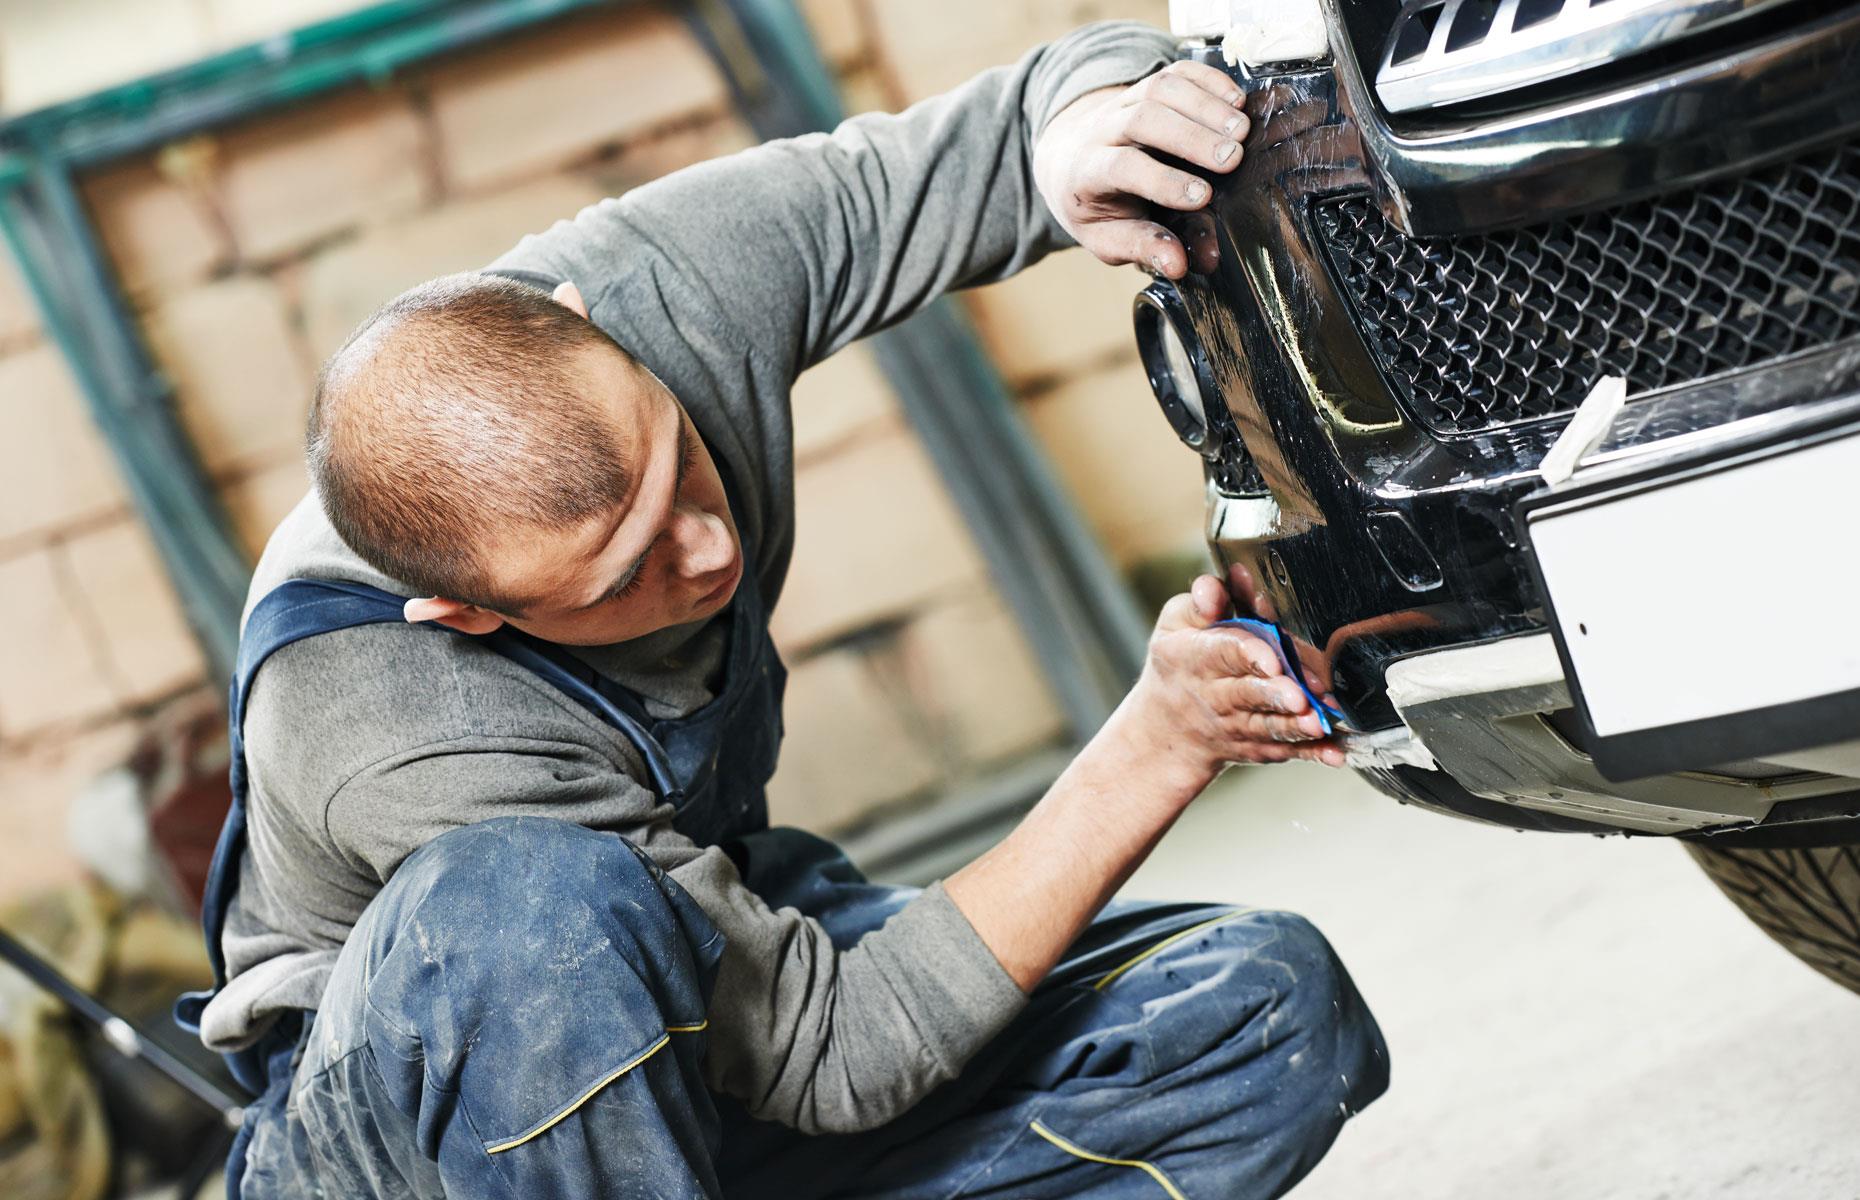 The poor spend 1.3% of their income on vehicle maintenance and repairs